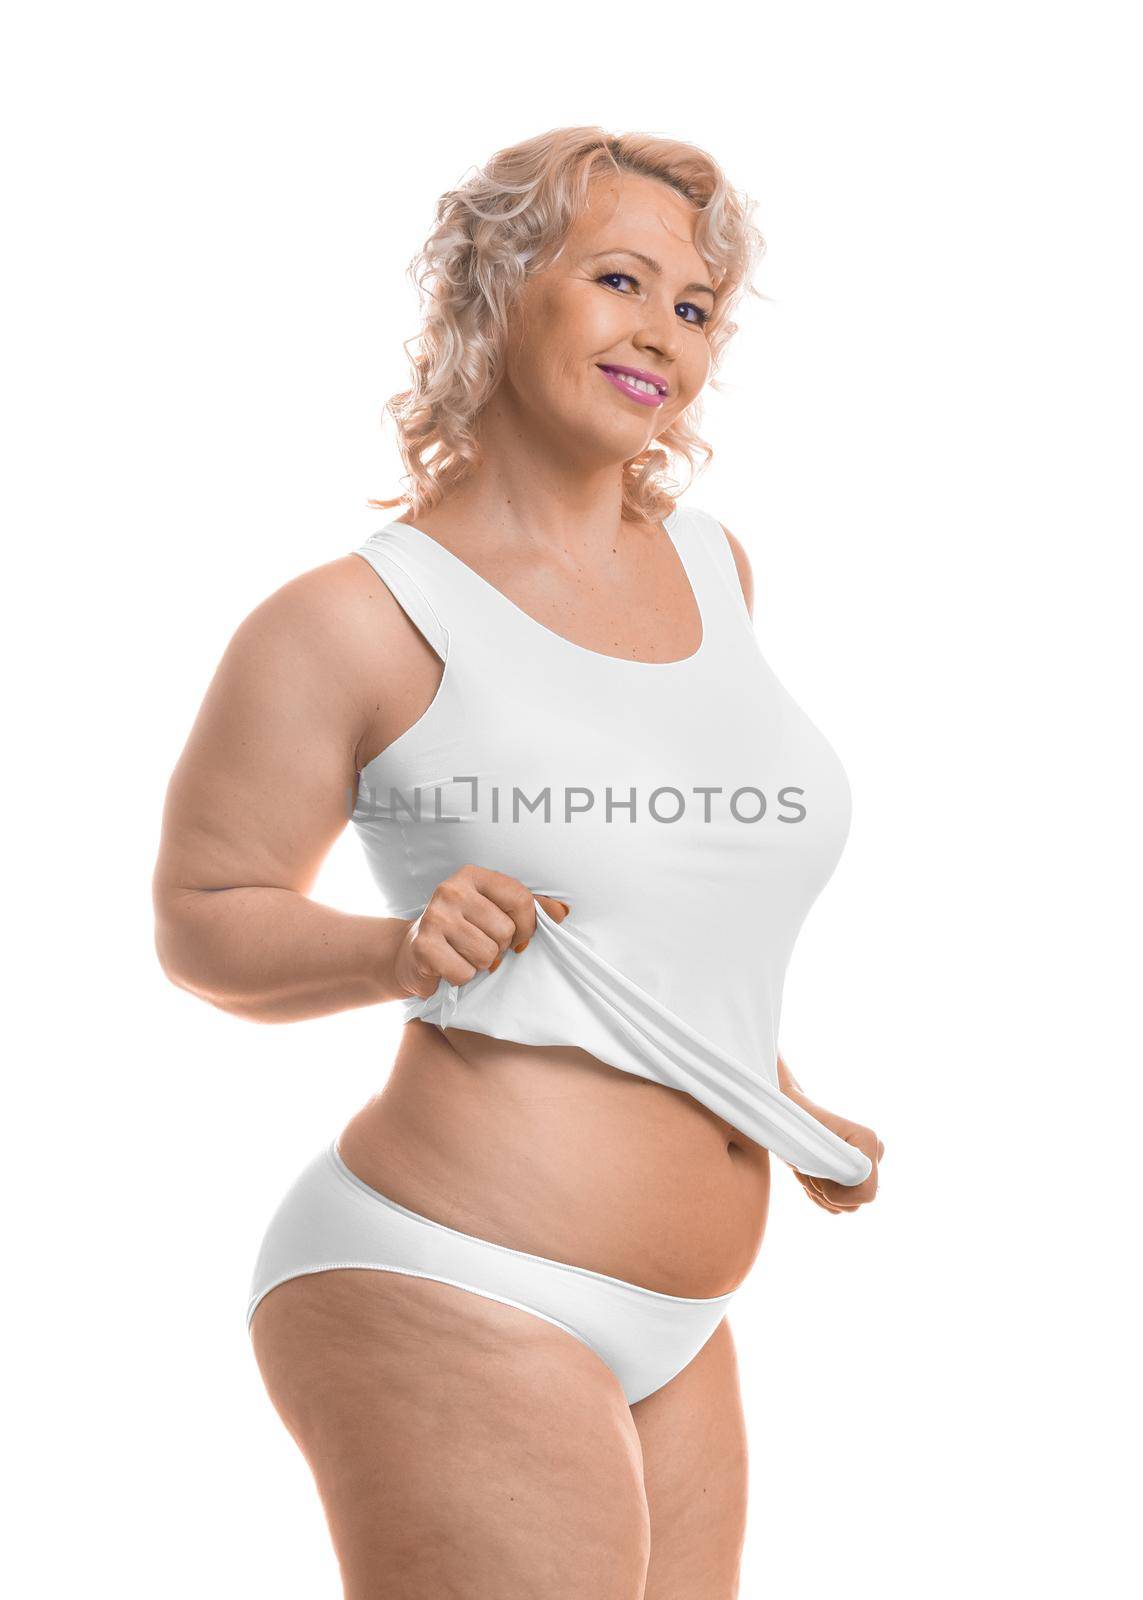 Portrait of a happy middle aged plus size model in white lingerie over white background.